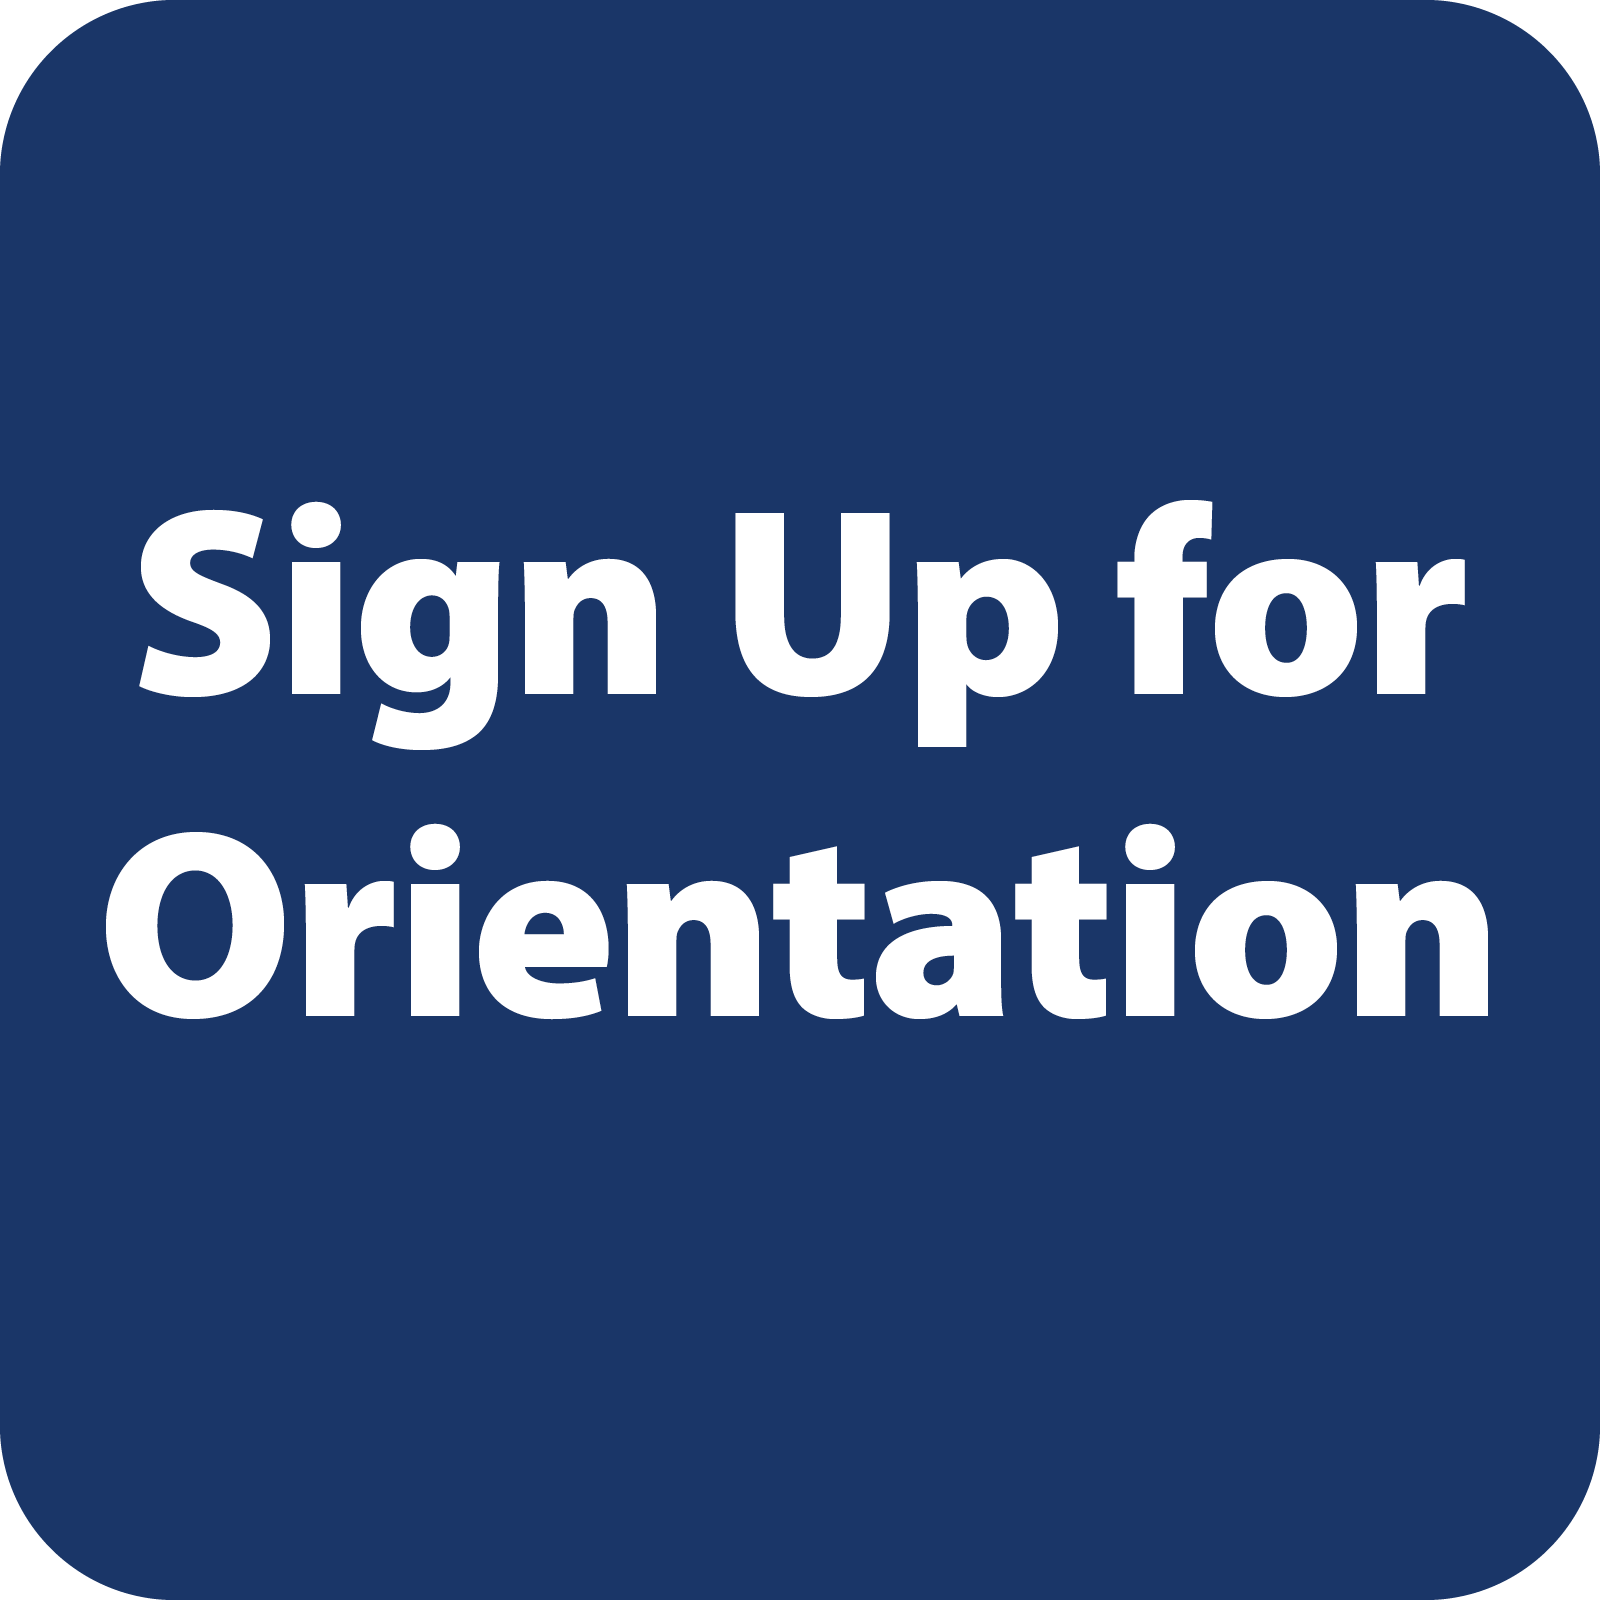 Sign up for Orientation